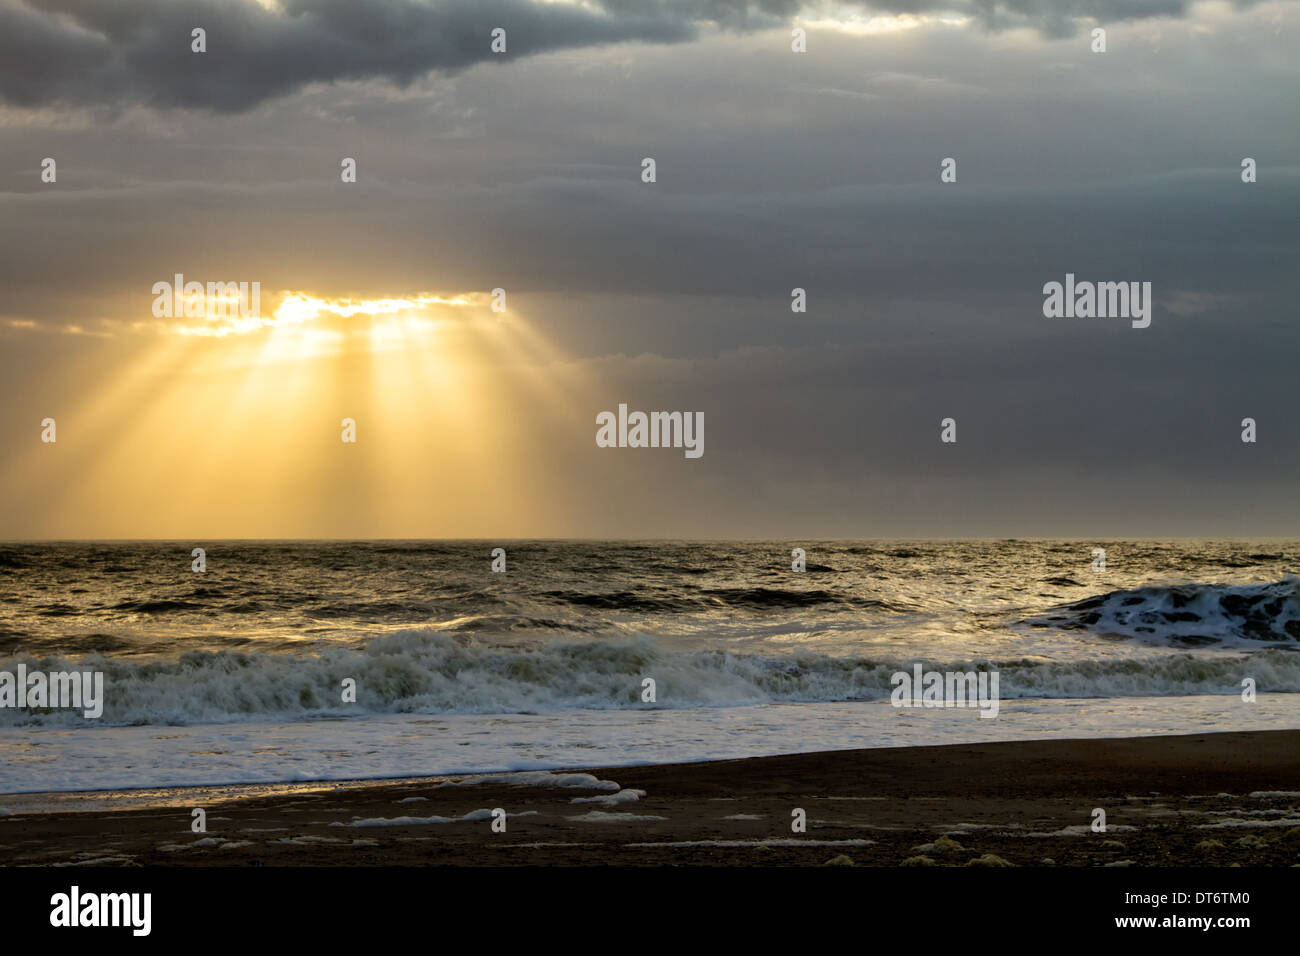 Crepuscular rays shine down on the ocean at sunrise. Stock Photo